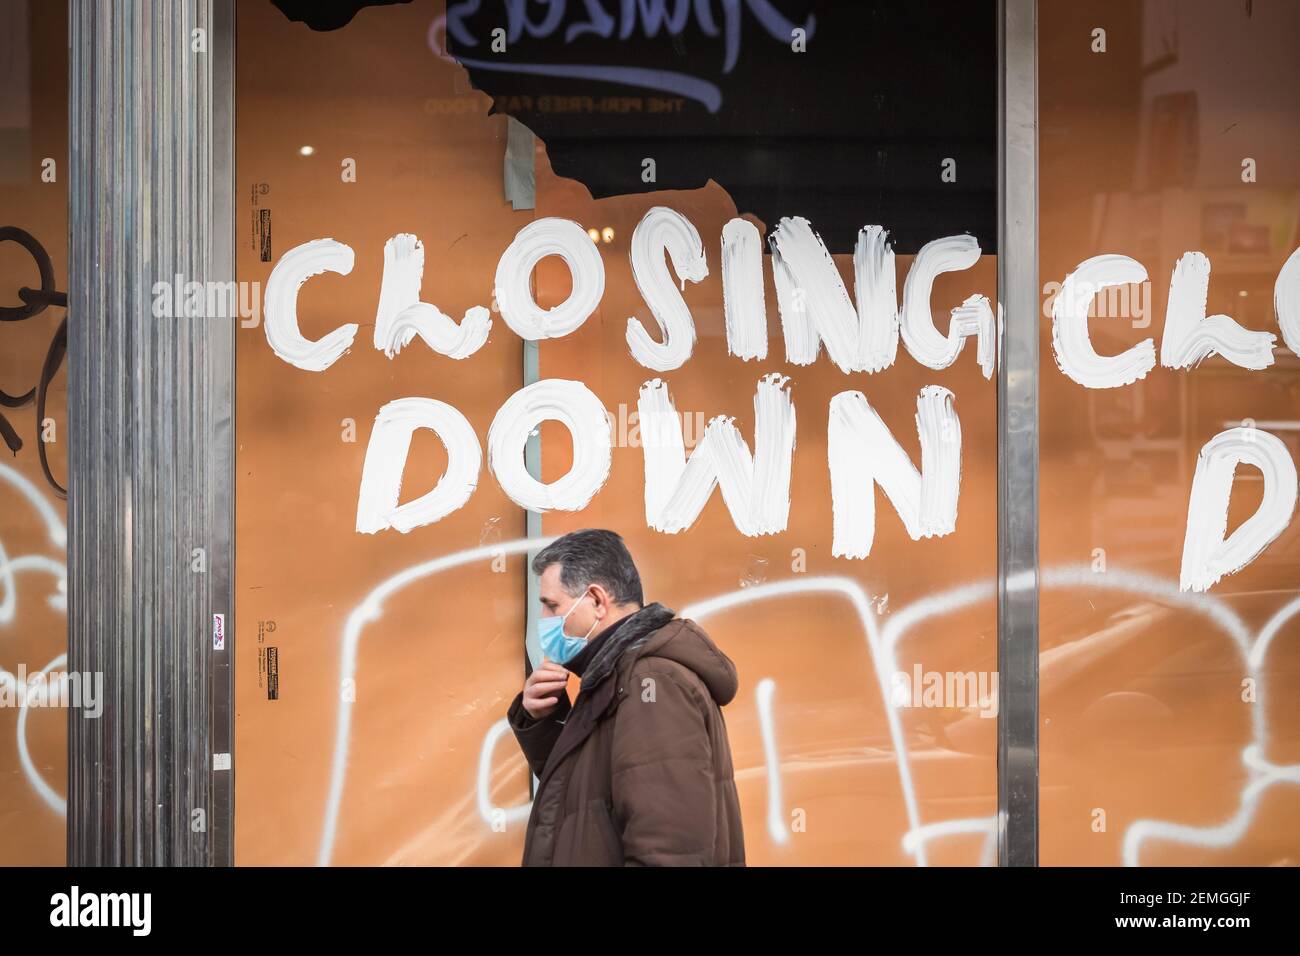 London, UK - 5 February, 2021 - Closing down sign on a shop window while a man with a protective face mask walking by on Wood Green high street Stock Photo